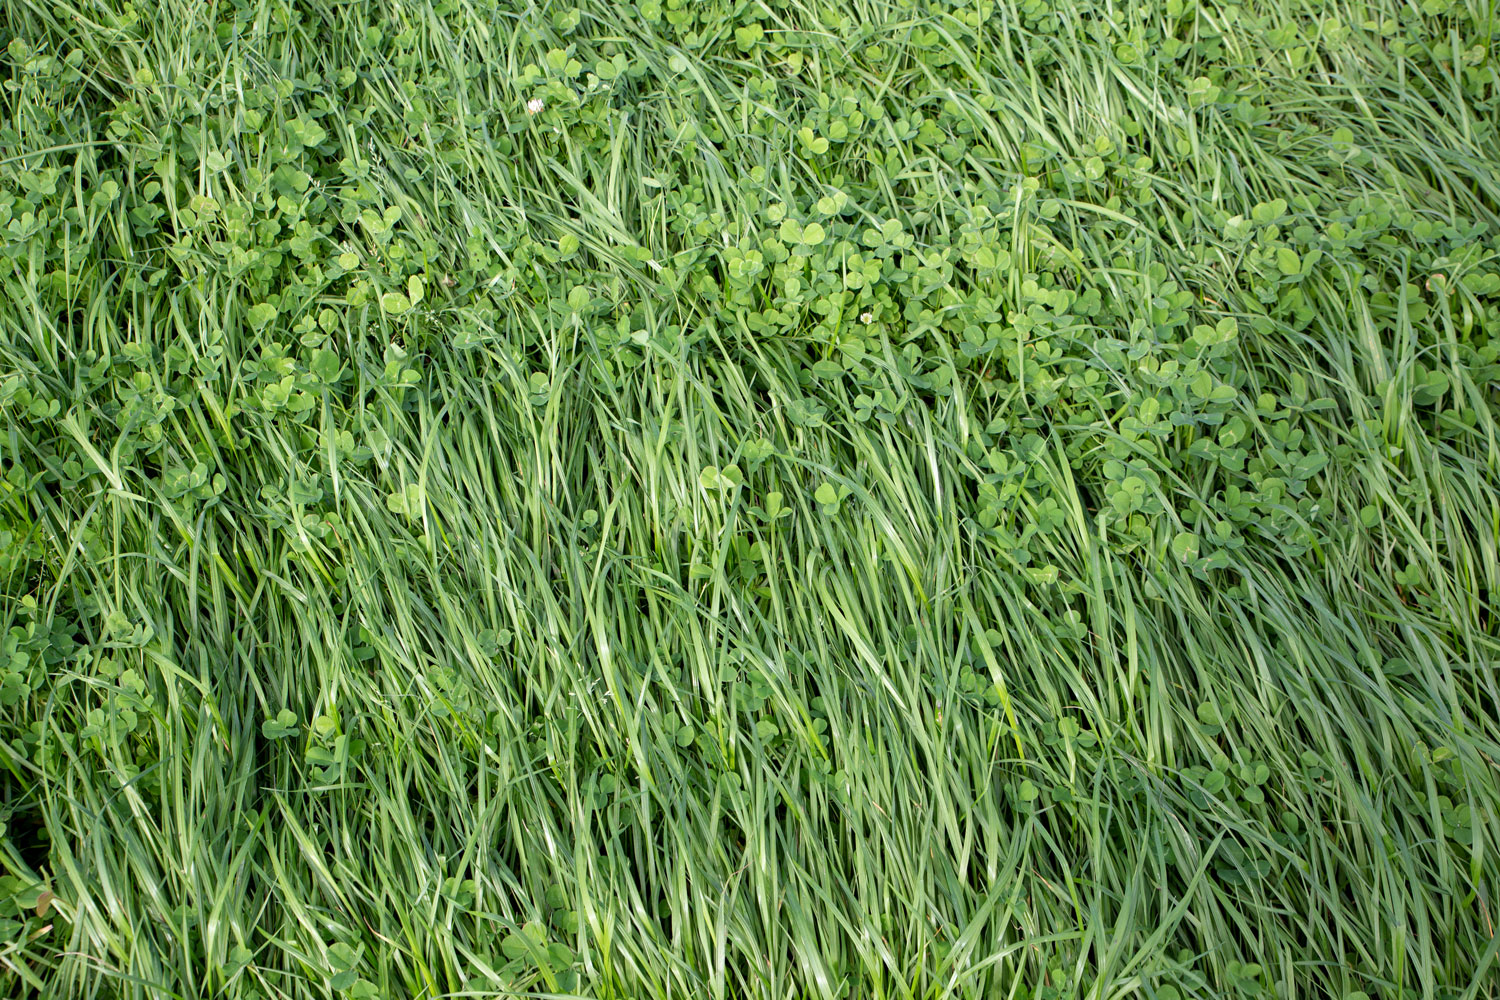 Annual ryegrass and clover grown in a rural field for stock food and hay 